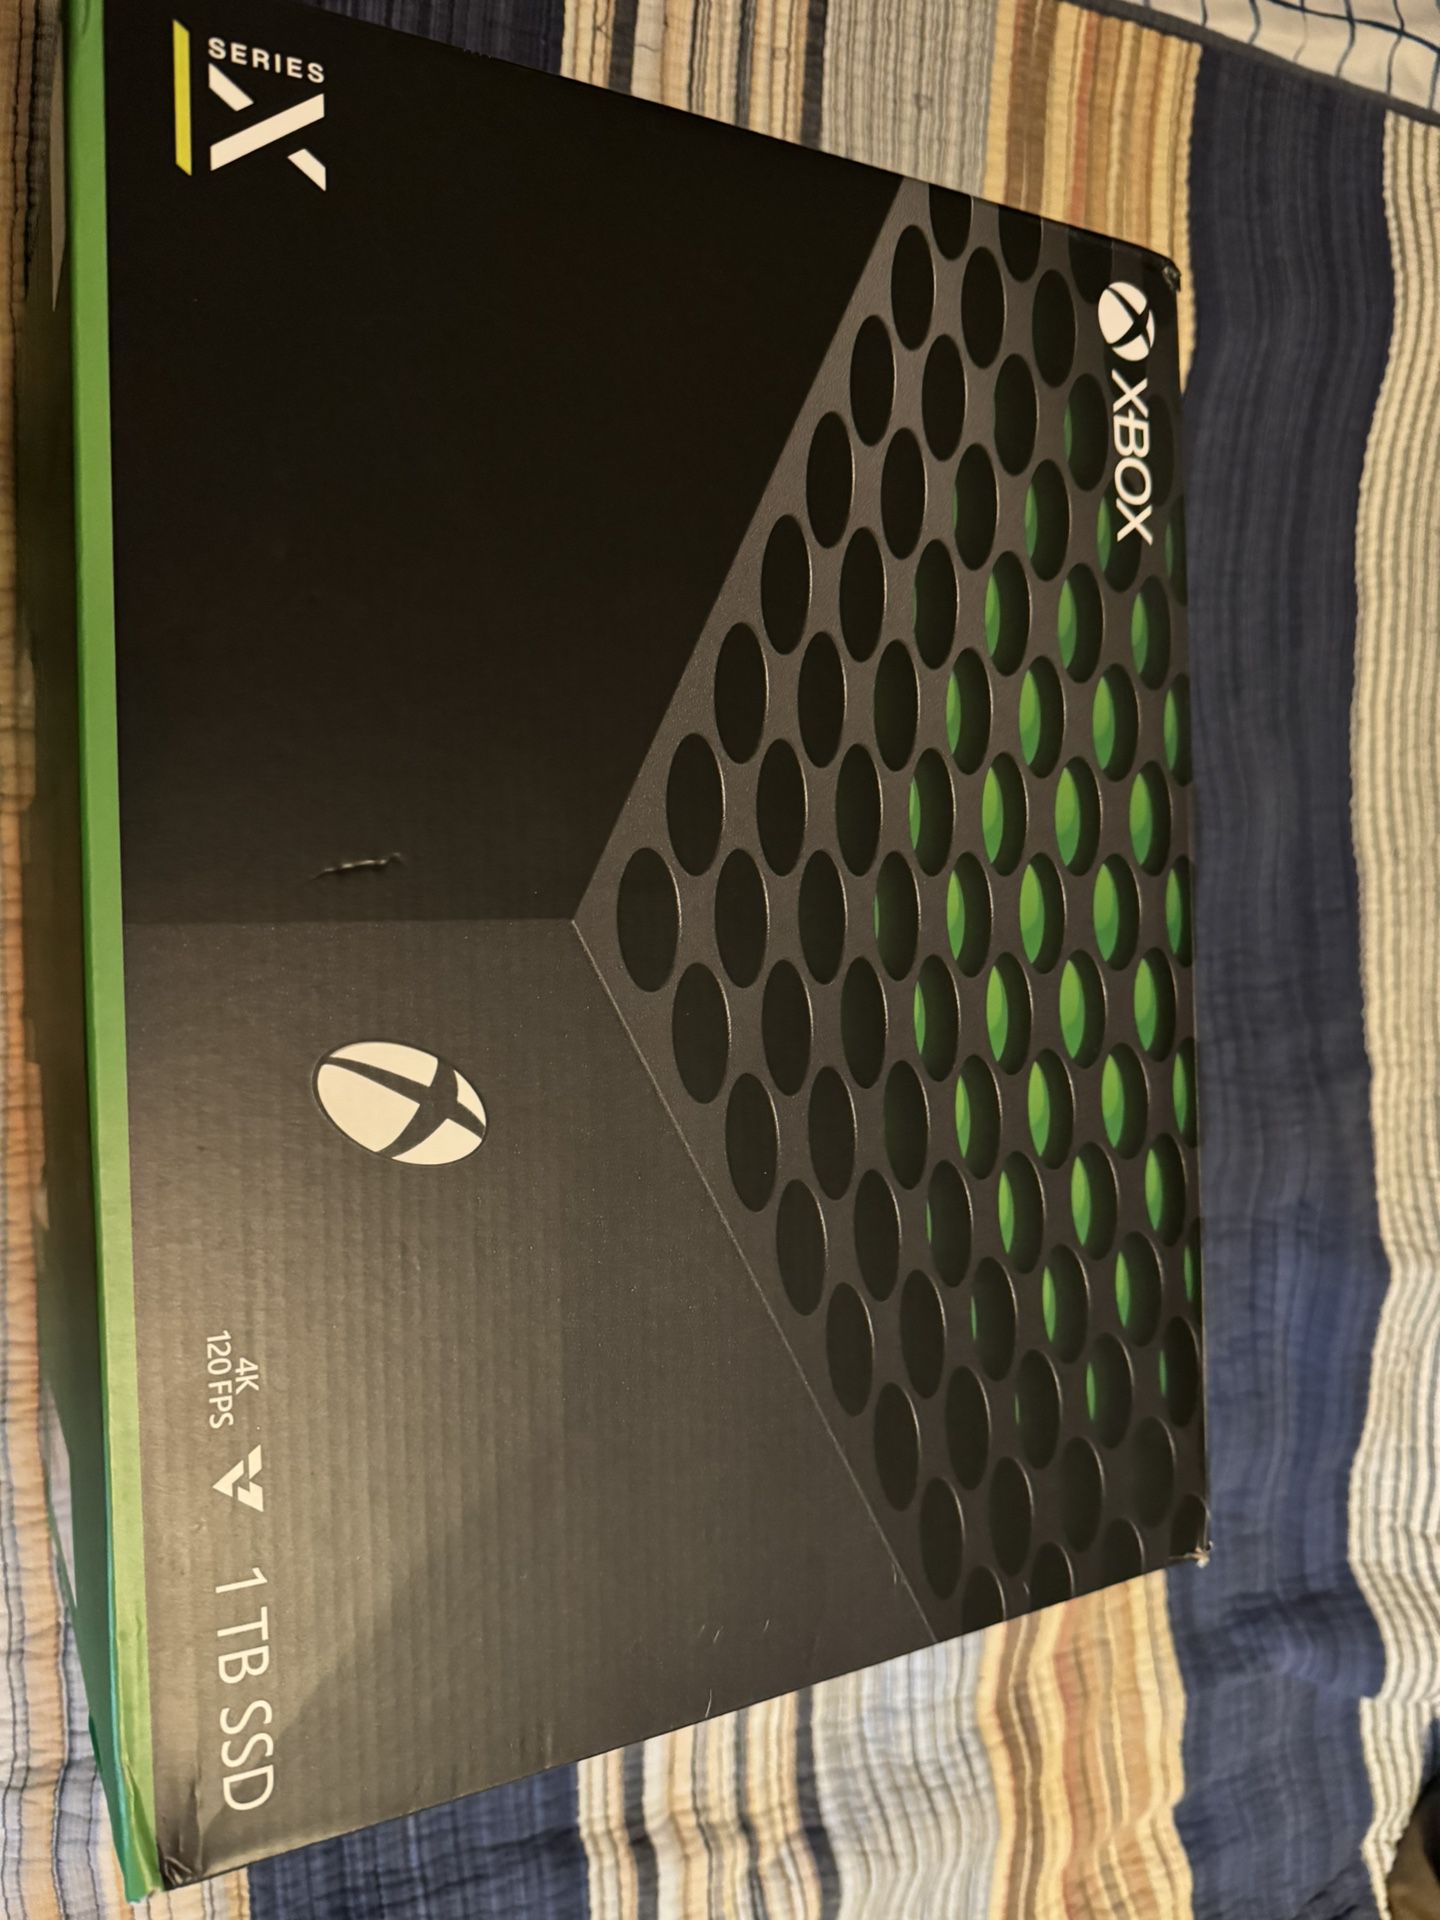 Xbox Series X With Games 